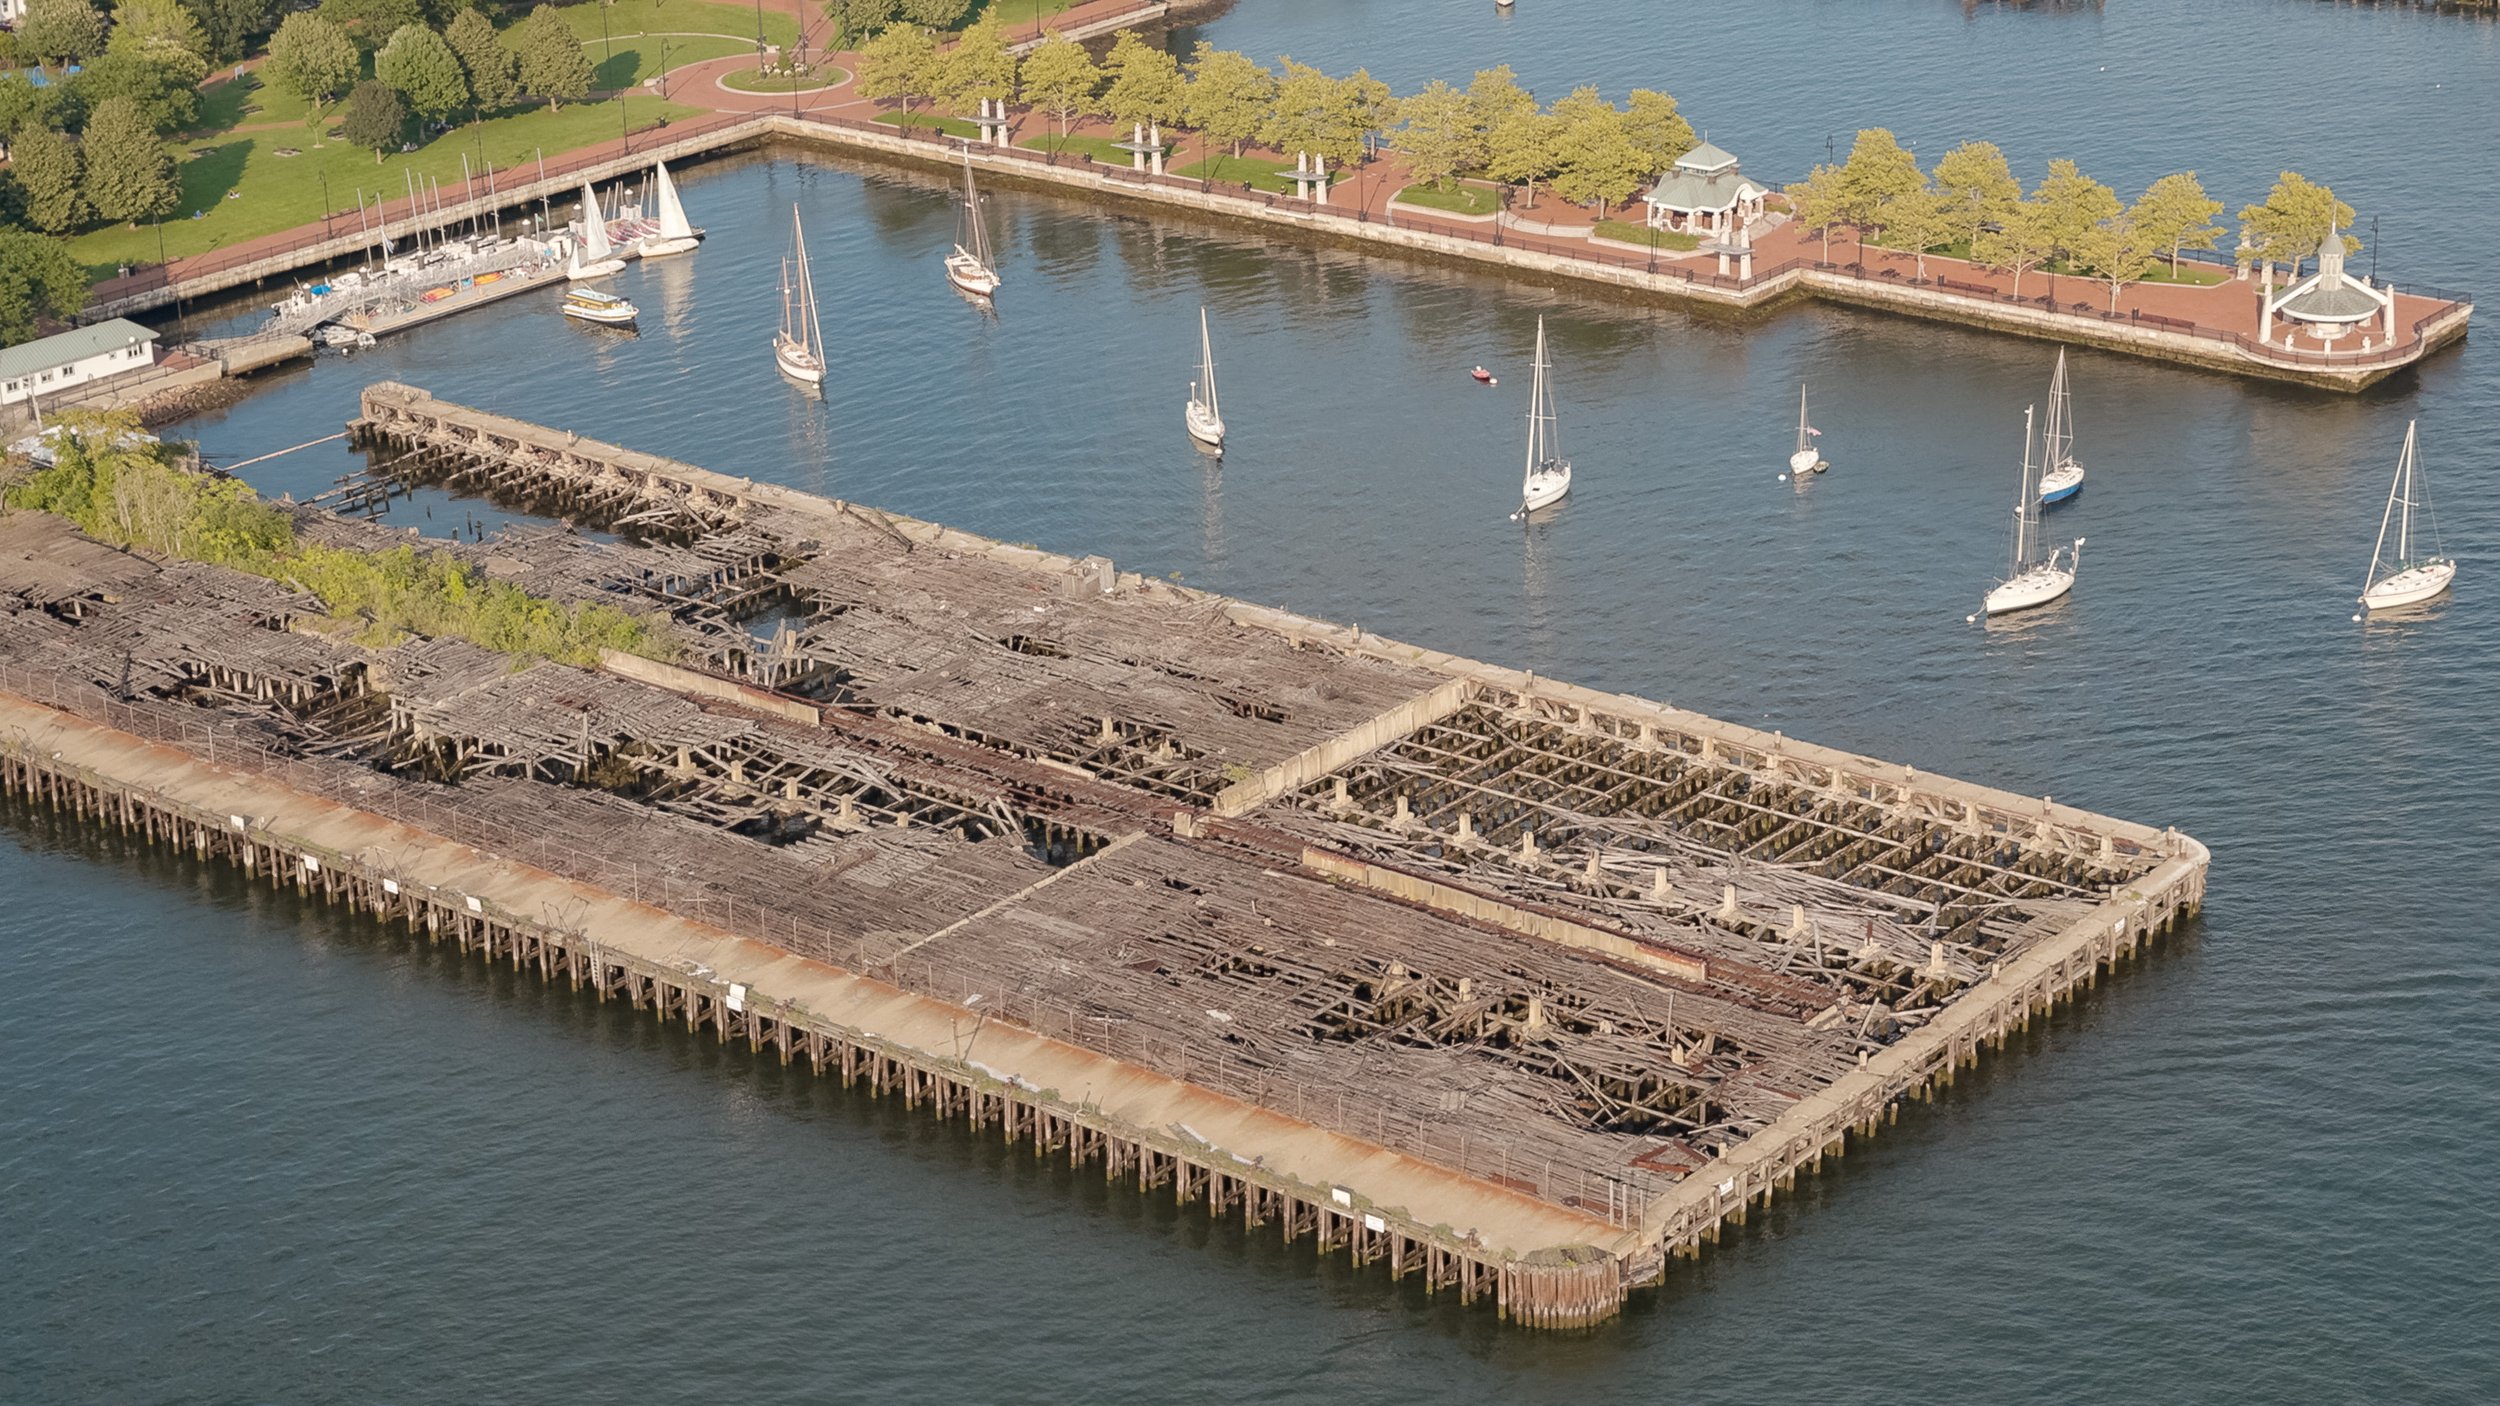 PIERS PARK III SITE, CURRENT DAY